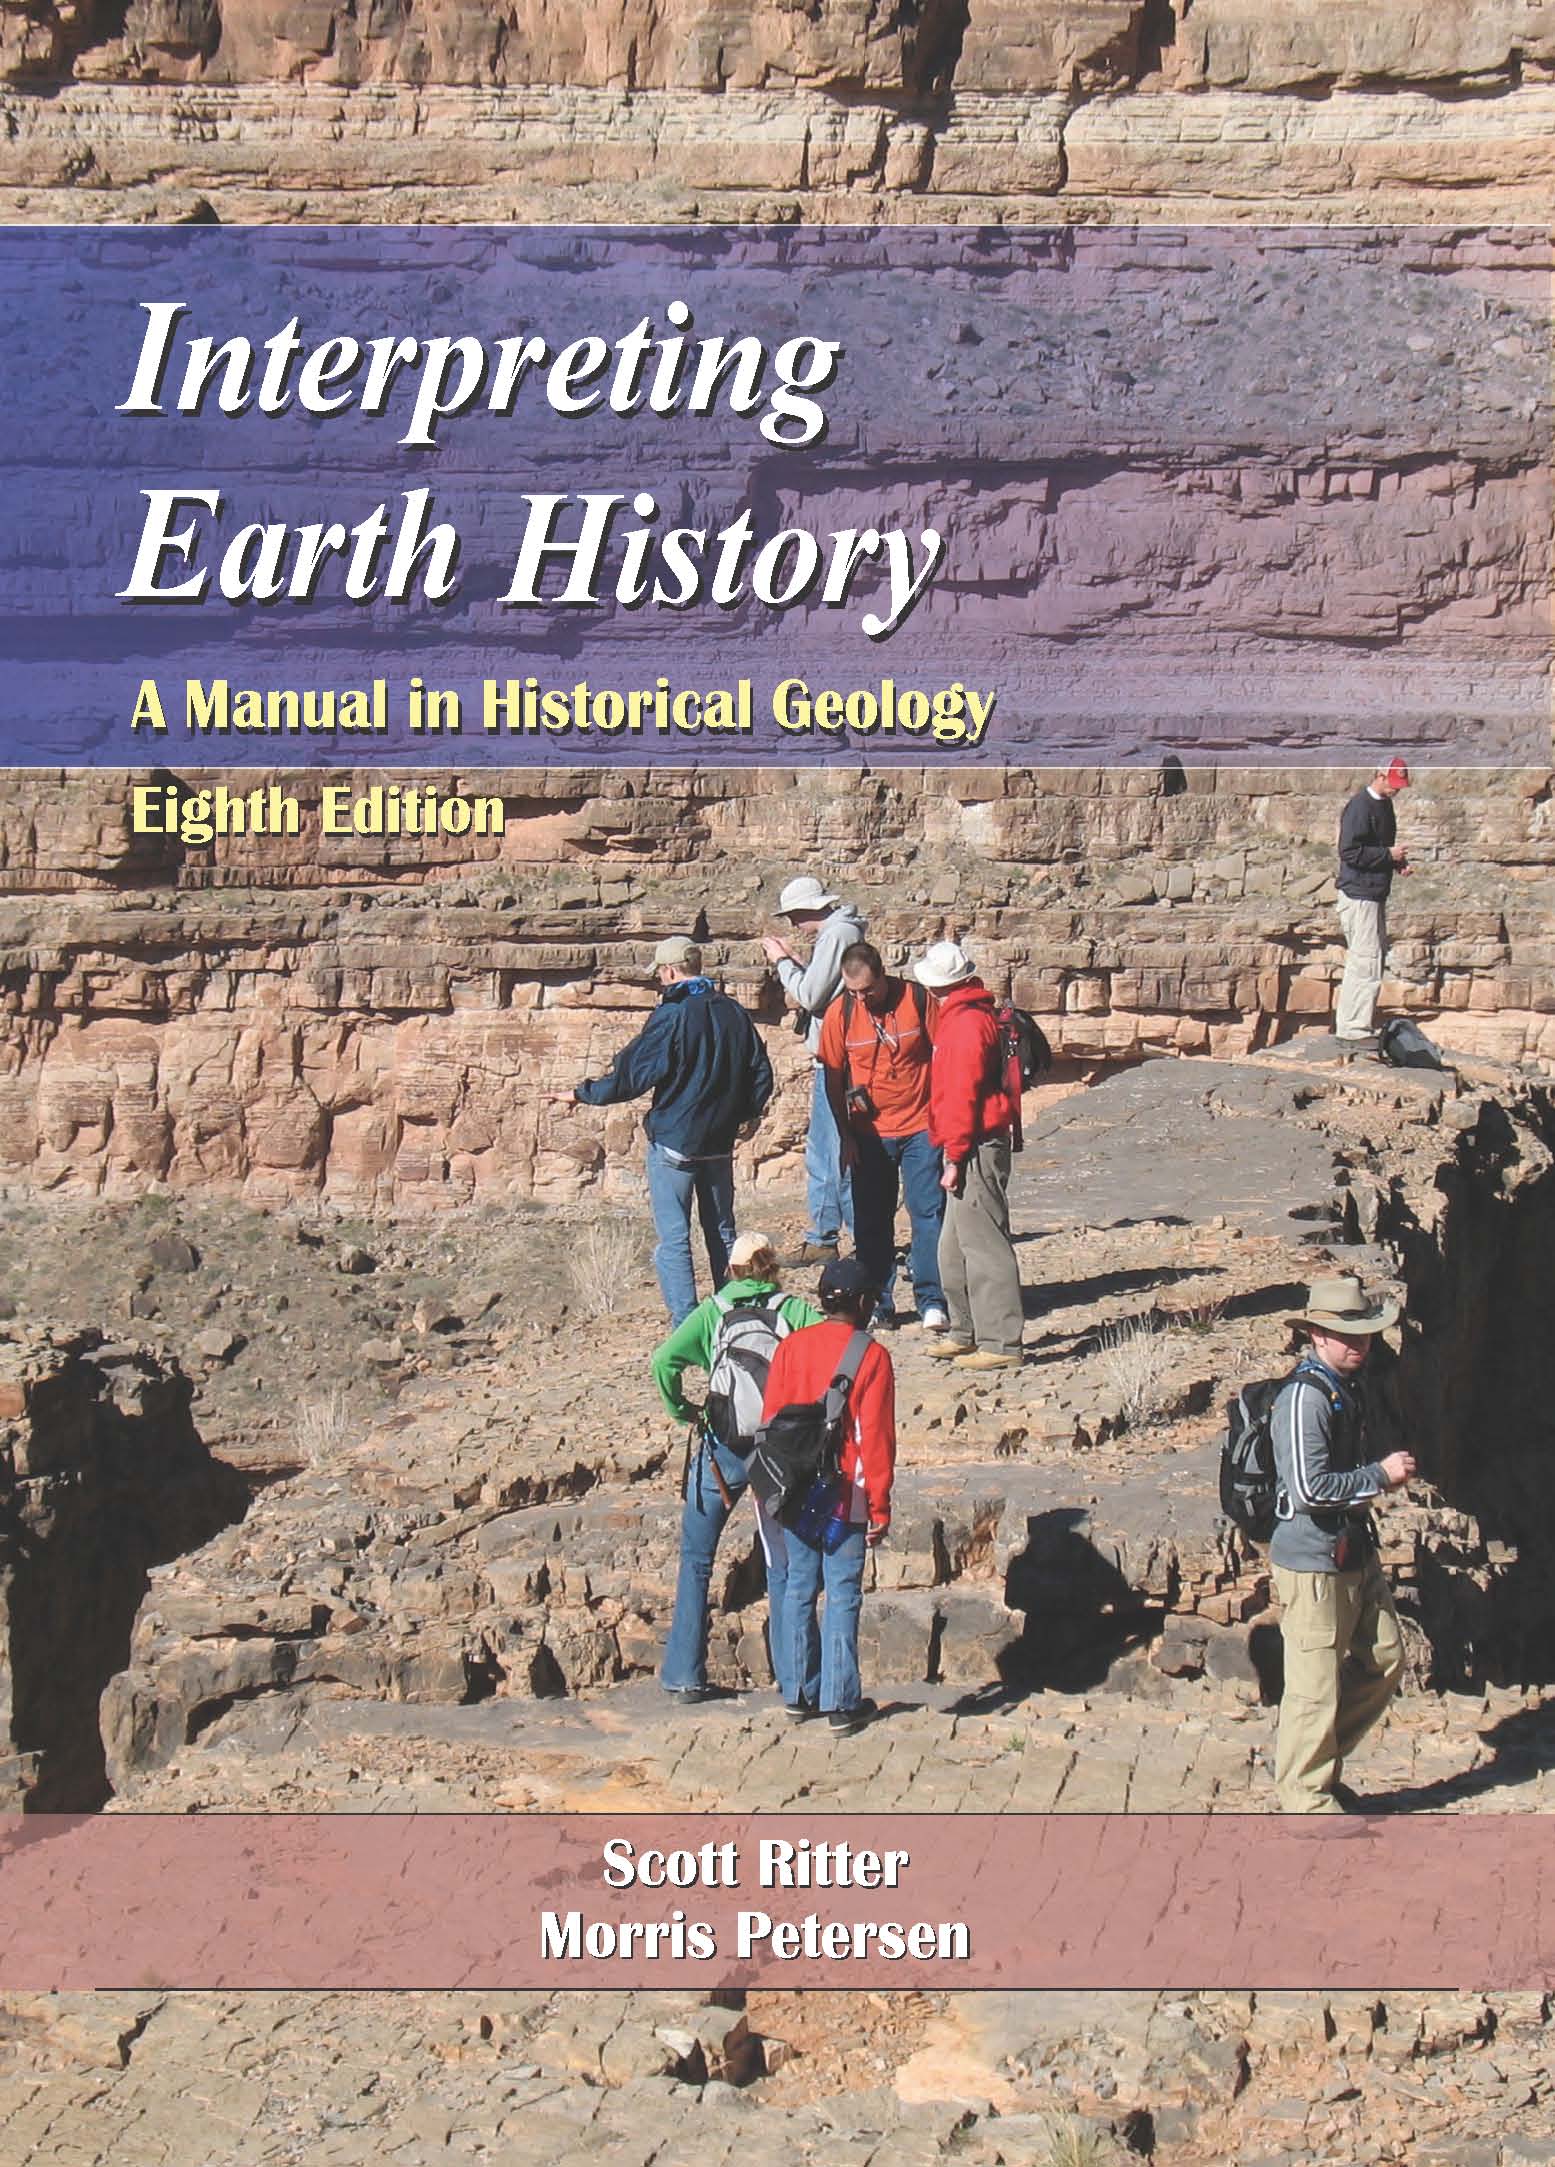 Interpreting Earth History: A Manual in Historical Geology, Eighth Edition by Scott  Ritter, Morris  Petersen